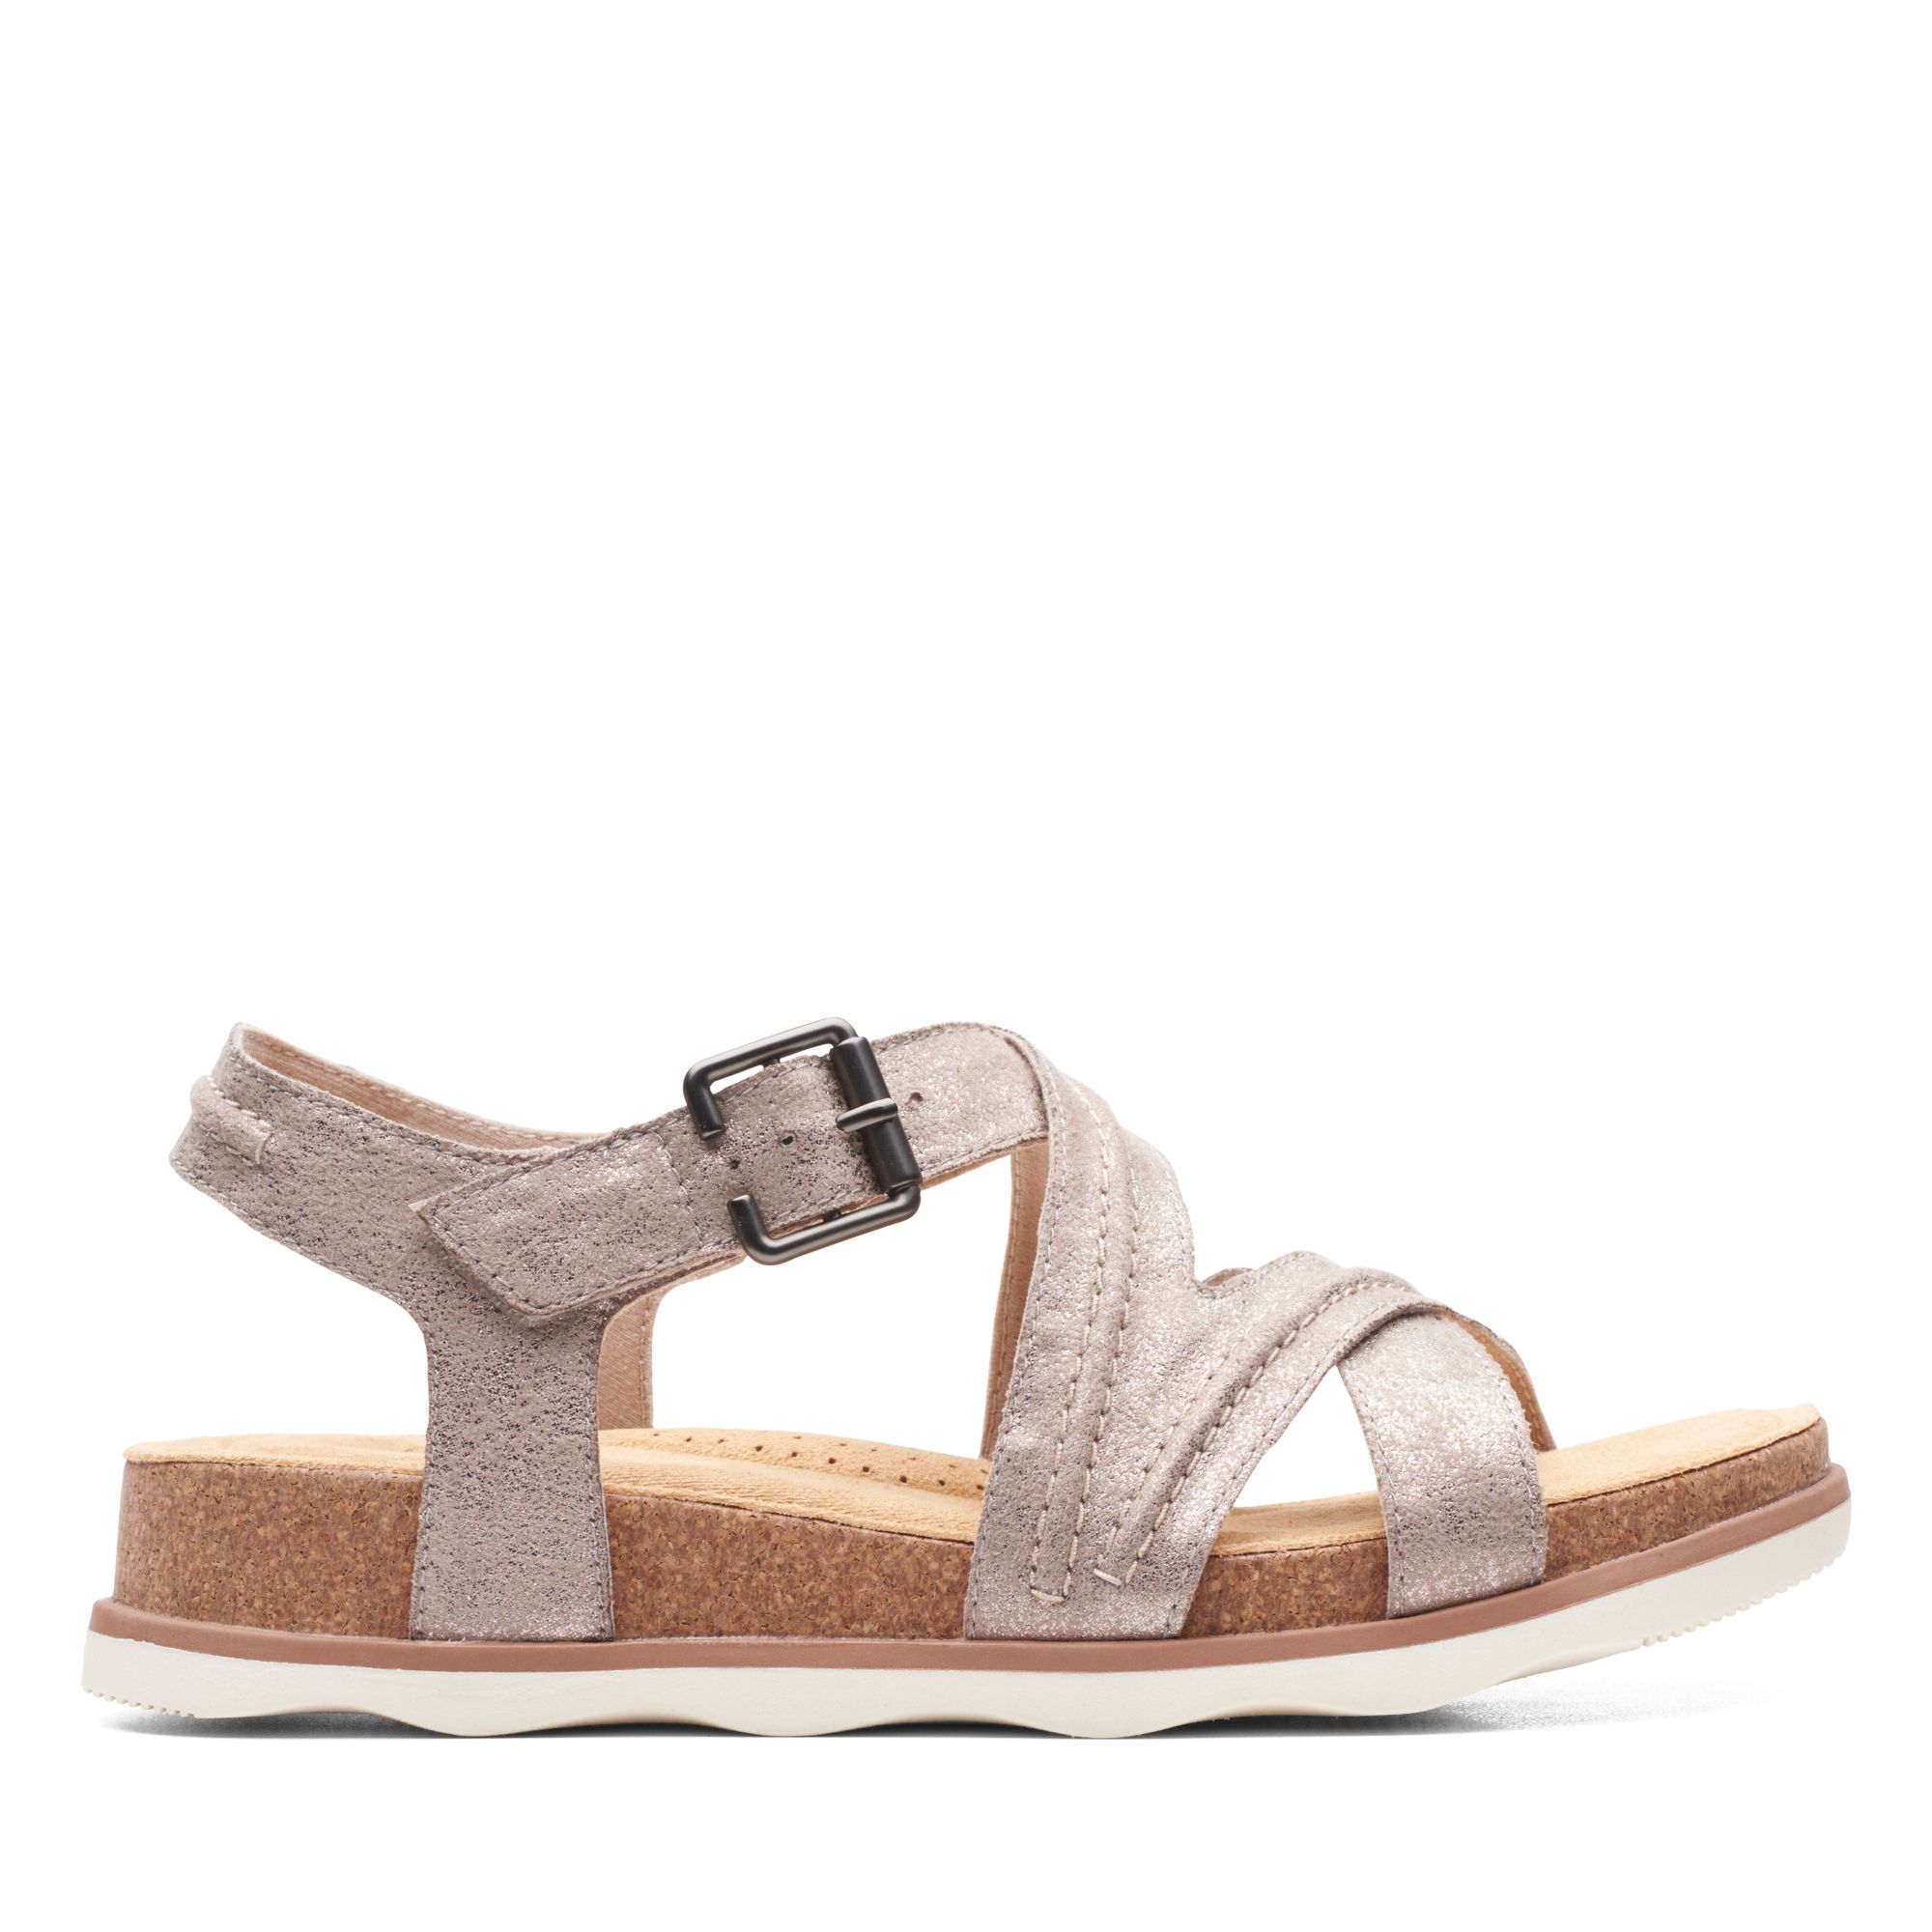 Clarks Women's Collection Brynn Ave Sandals Women's Shoes In Beige ...